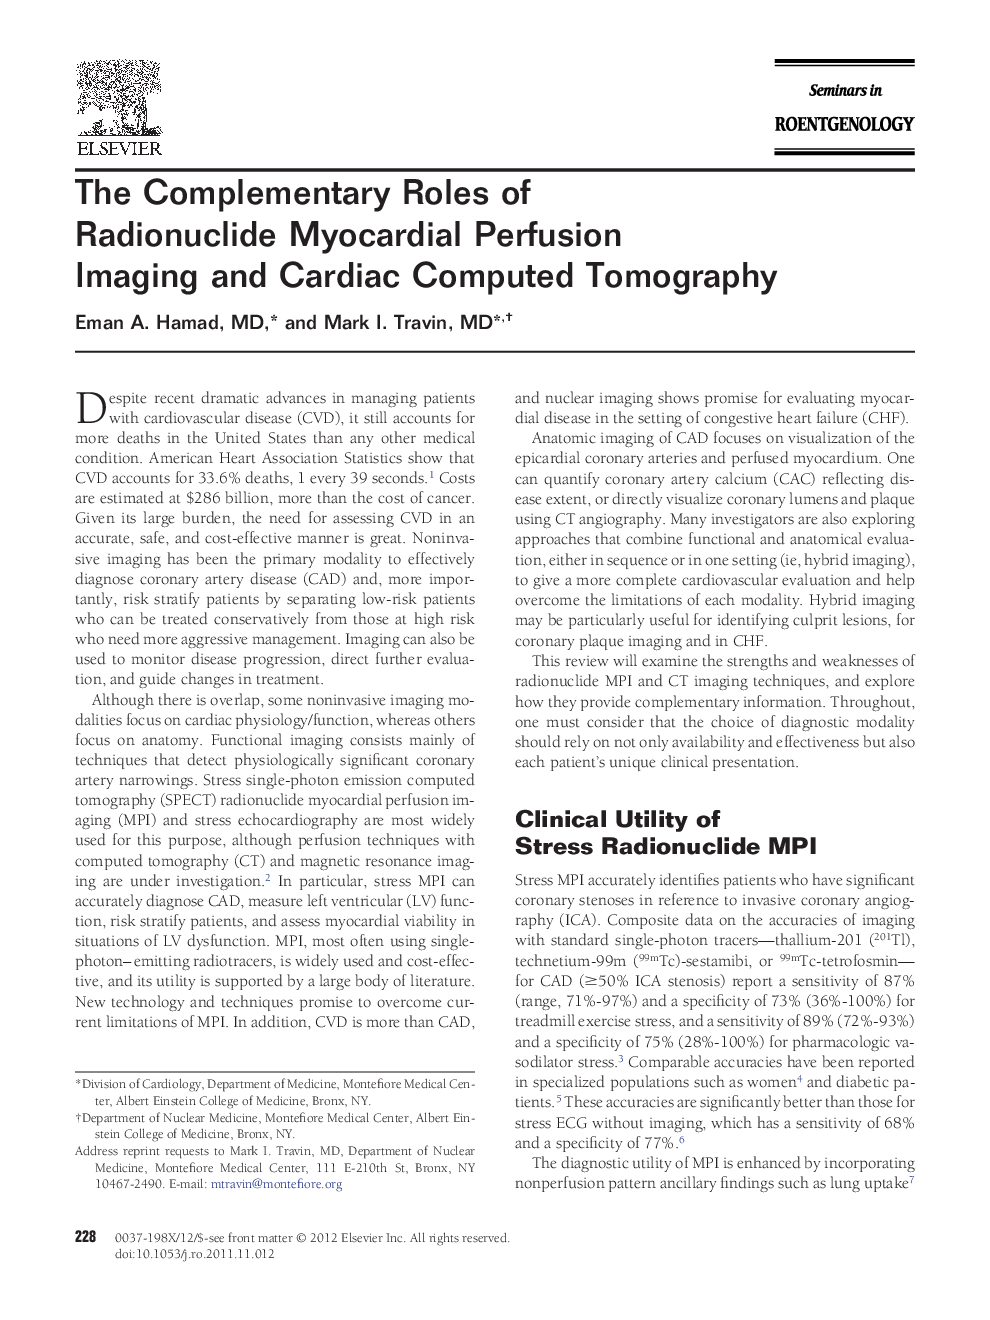 The Complementary Roles of Radionuclide Myocardial Perfusion Imaging and Cardiac Computed Tomography